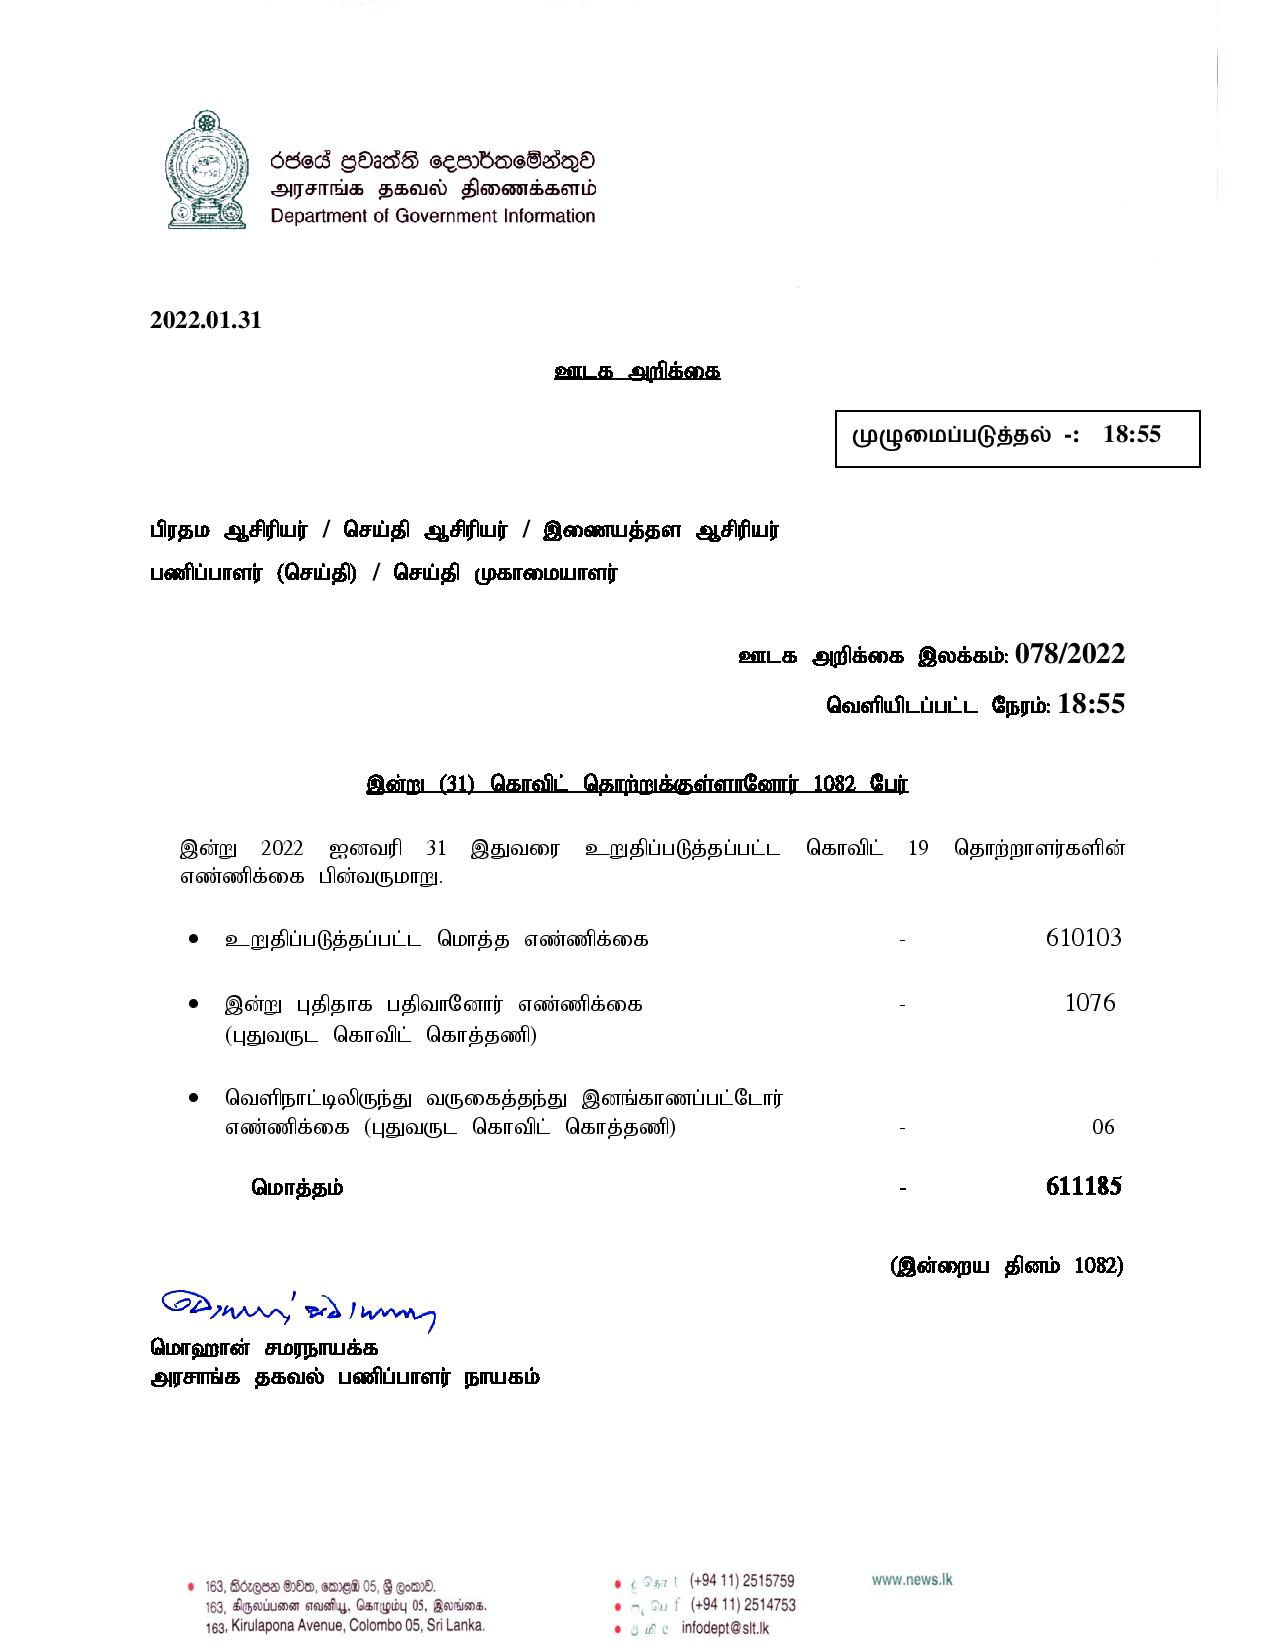 Press Release 78 Tamil page 001